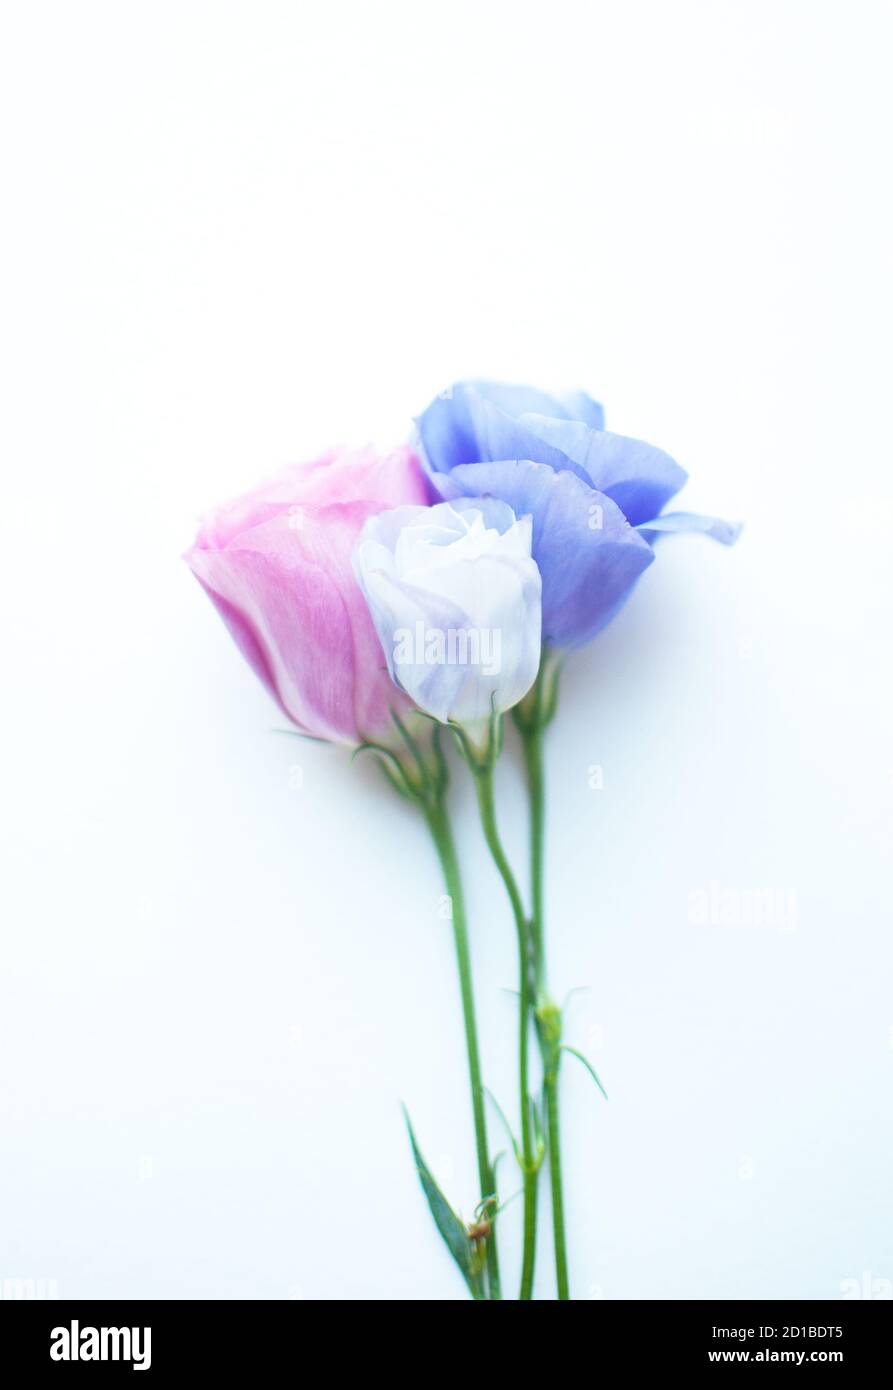 Beautiful pink, purple and white eustoma flower (lisianthus) in full bloom with green leaves. Bouquet of flowers on white background. Stock Photo